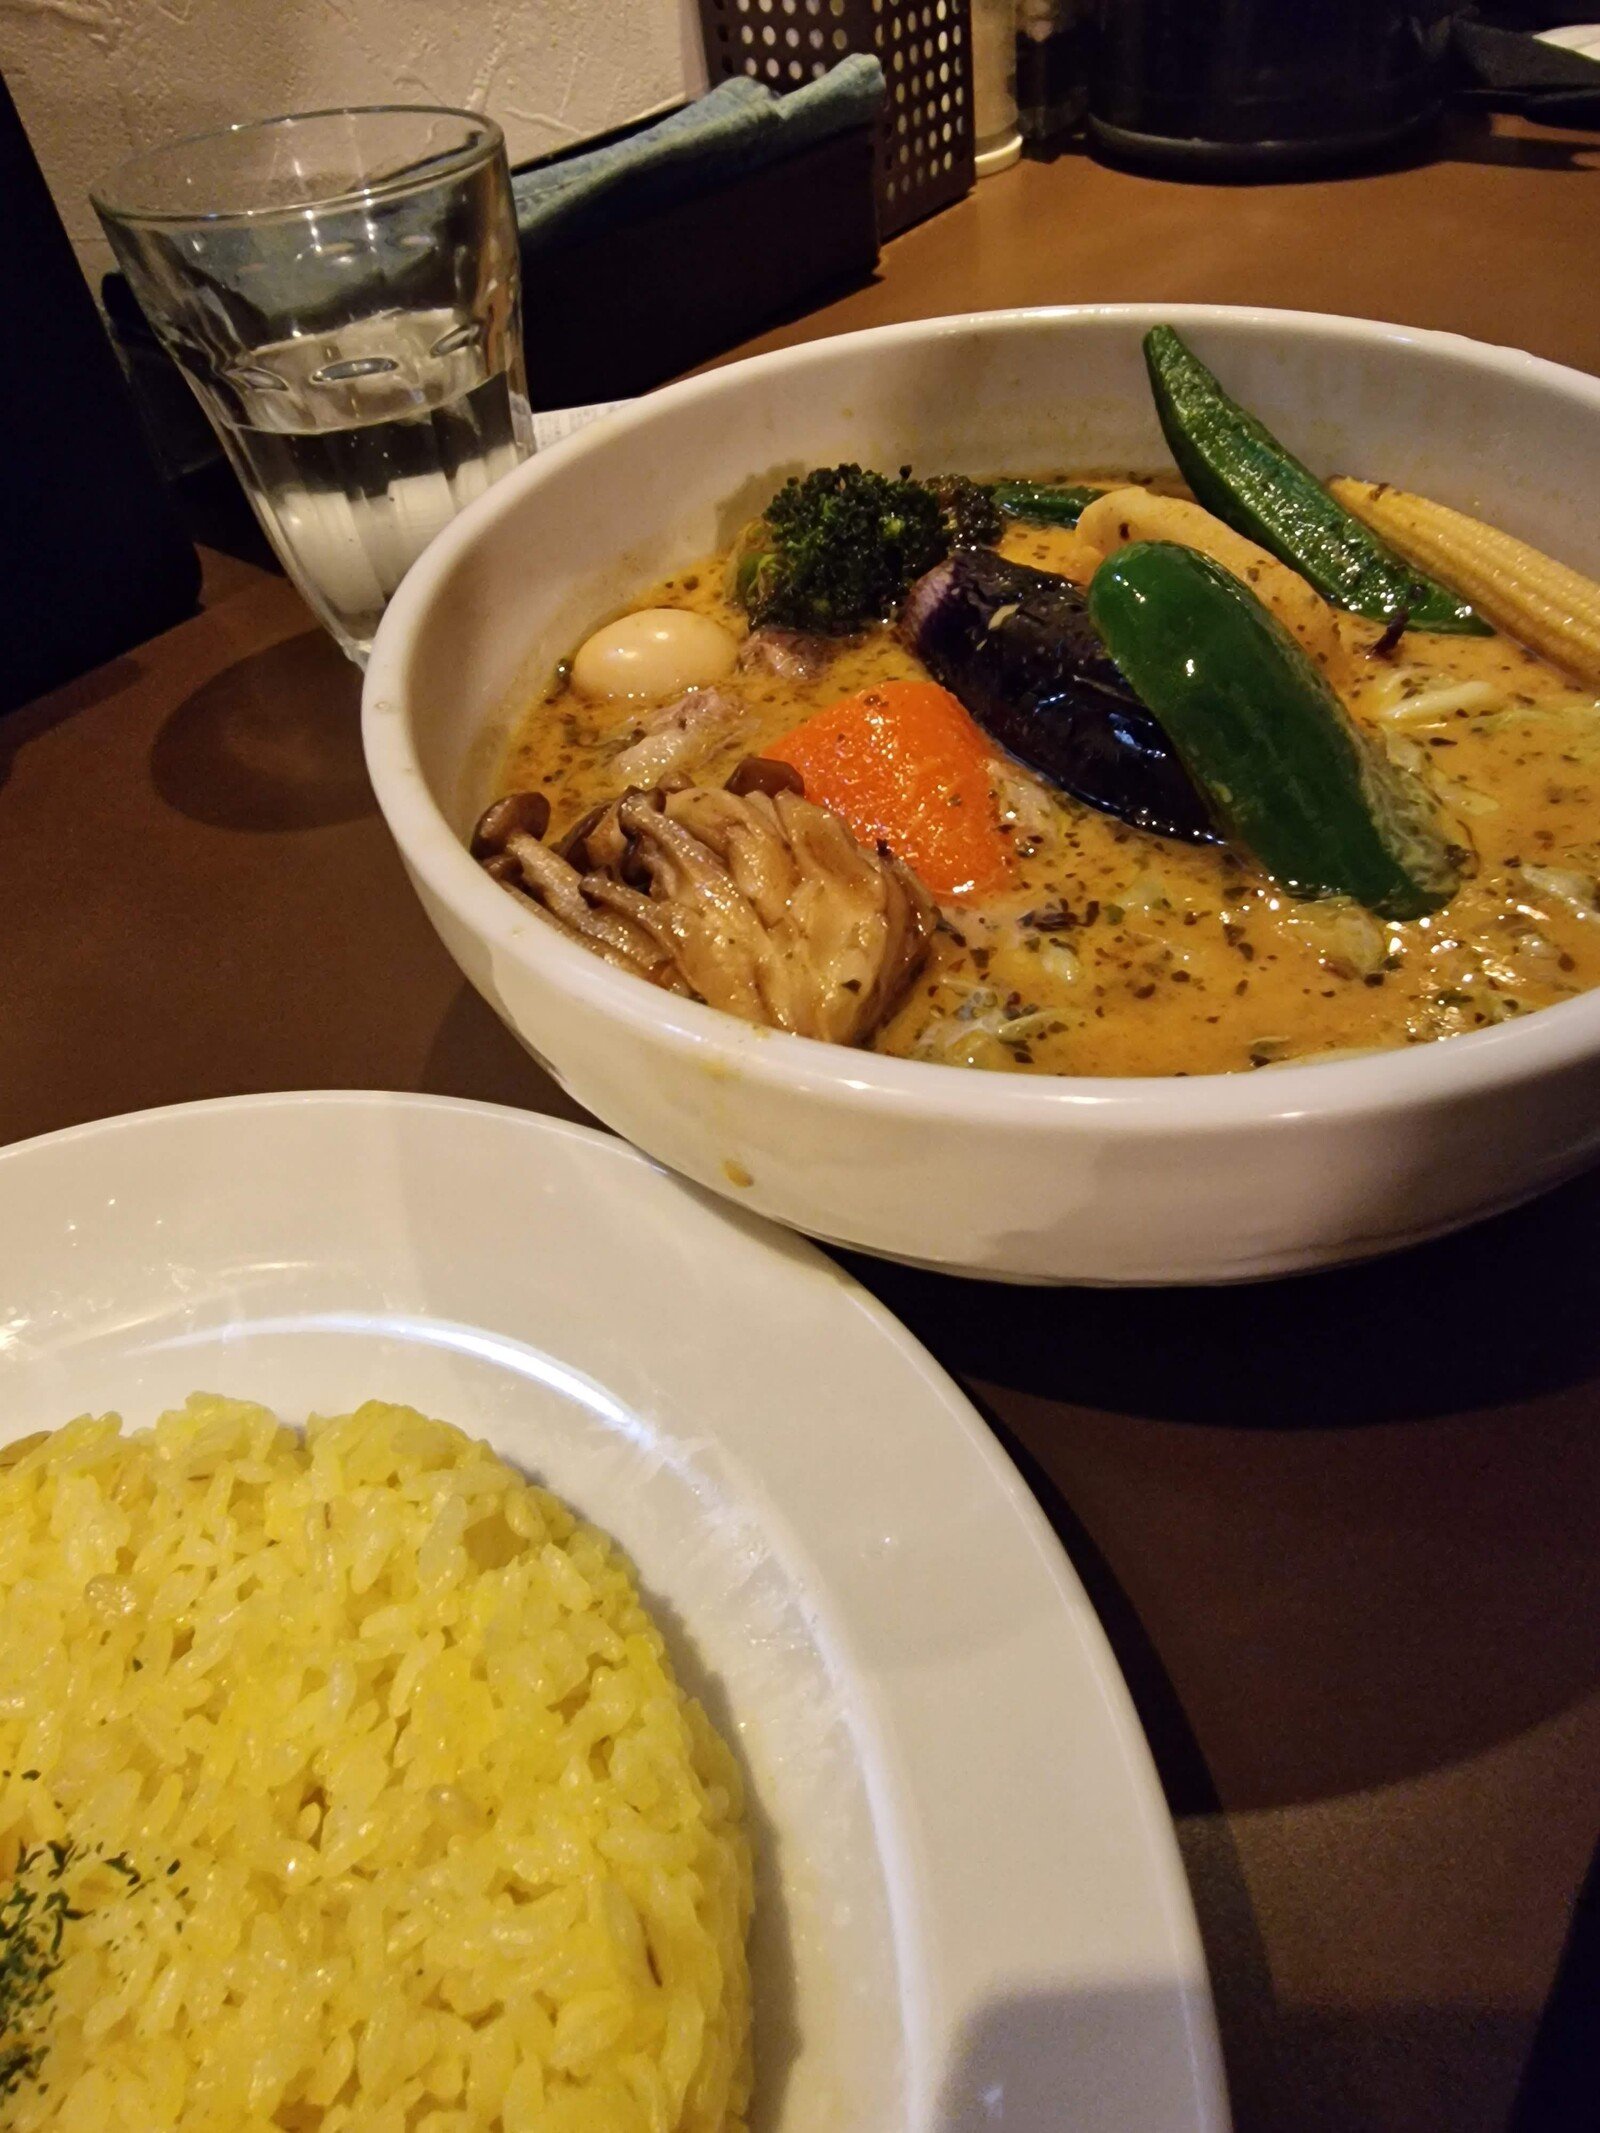 a bowl of yellow soup broth with vegetables in it and a plate of yellow rice next to it - Hokkaido soup curry